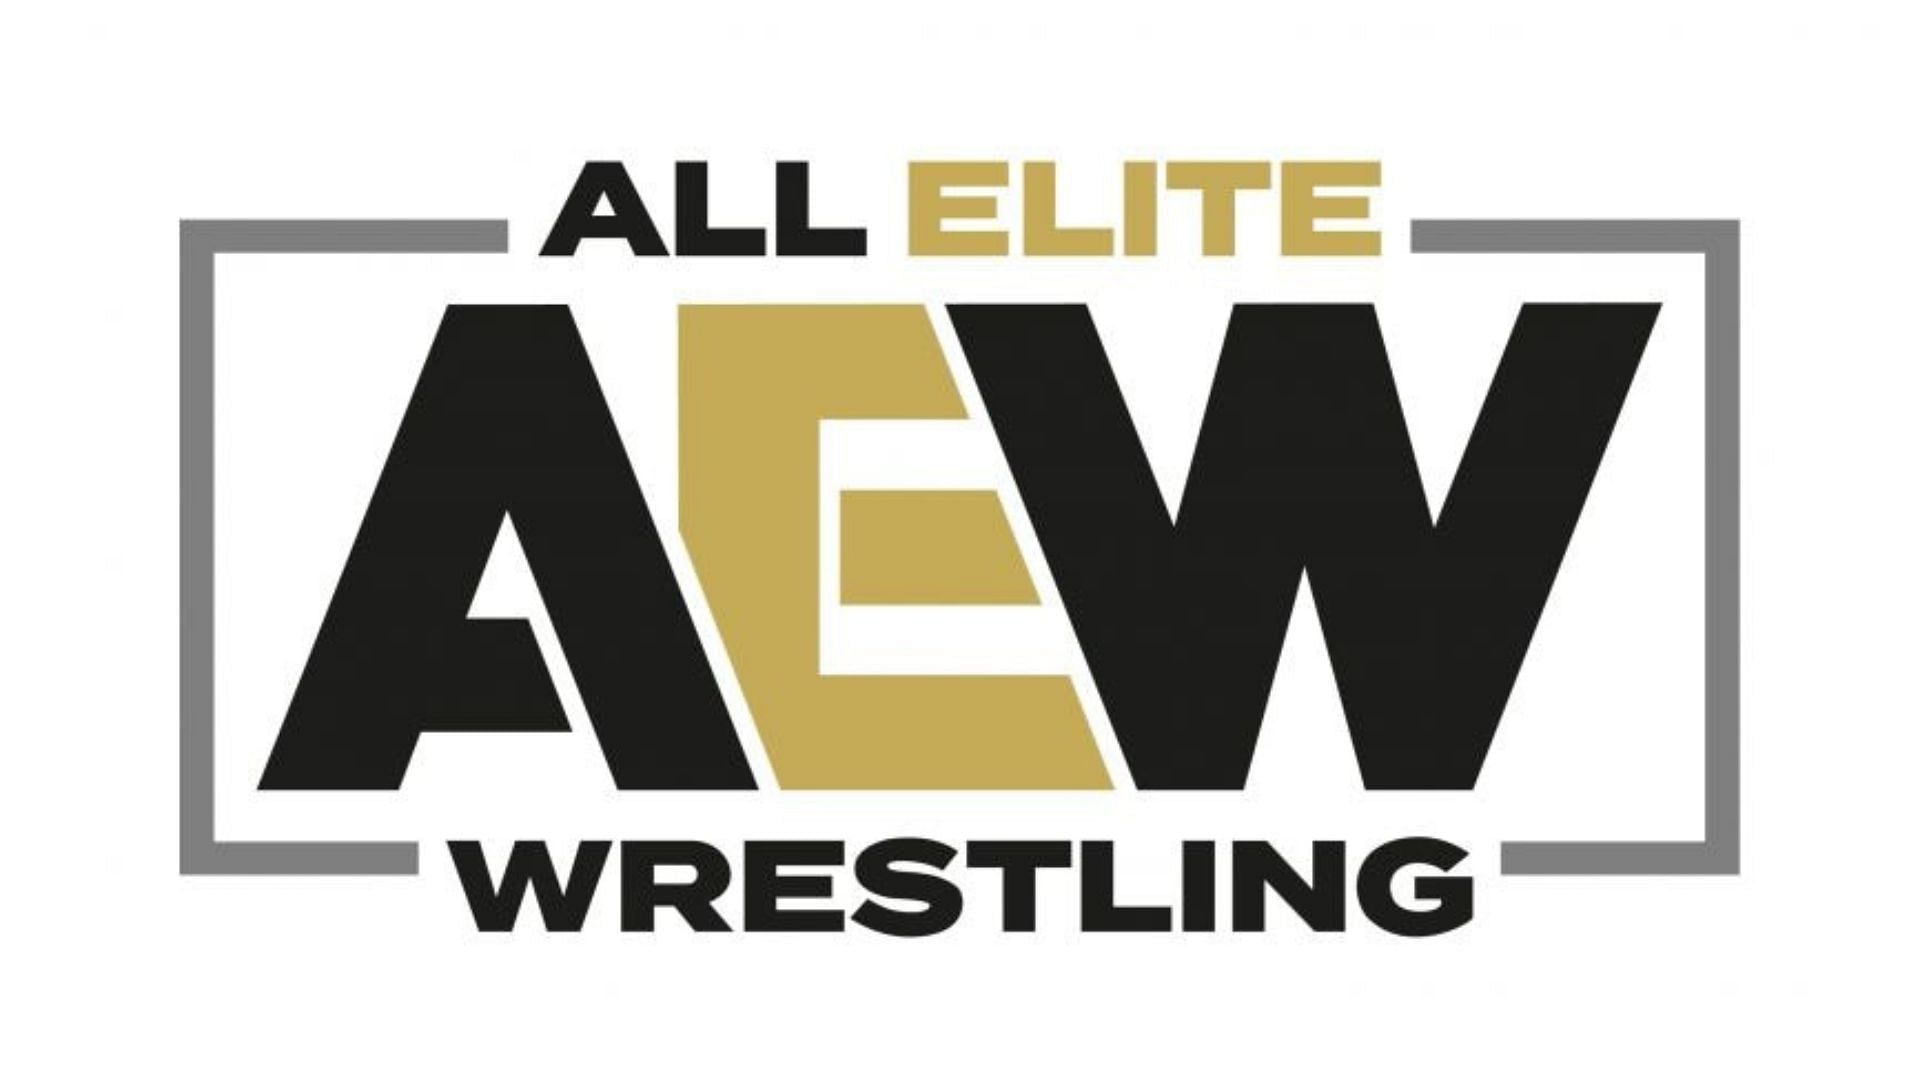 AEW boasts an incredible roster across all divisions